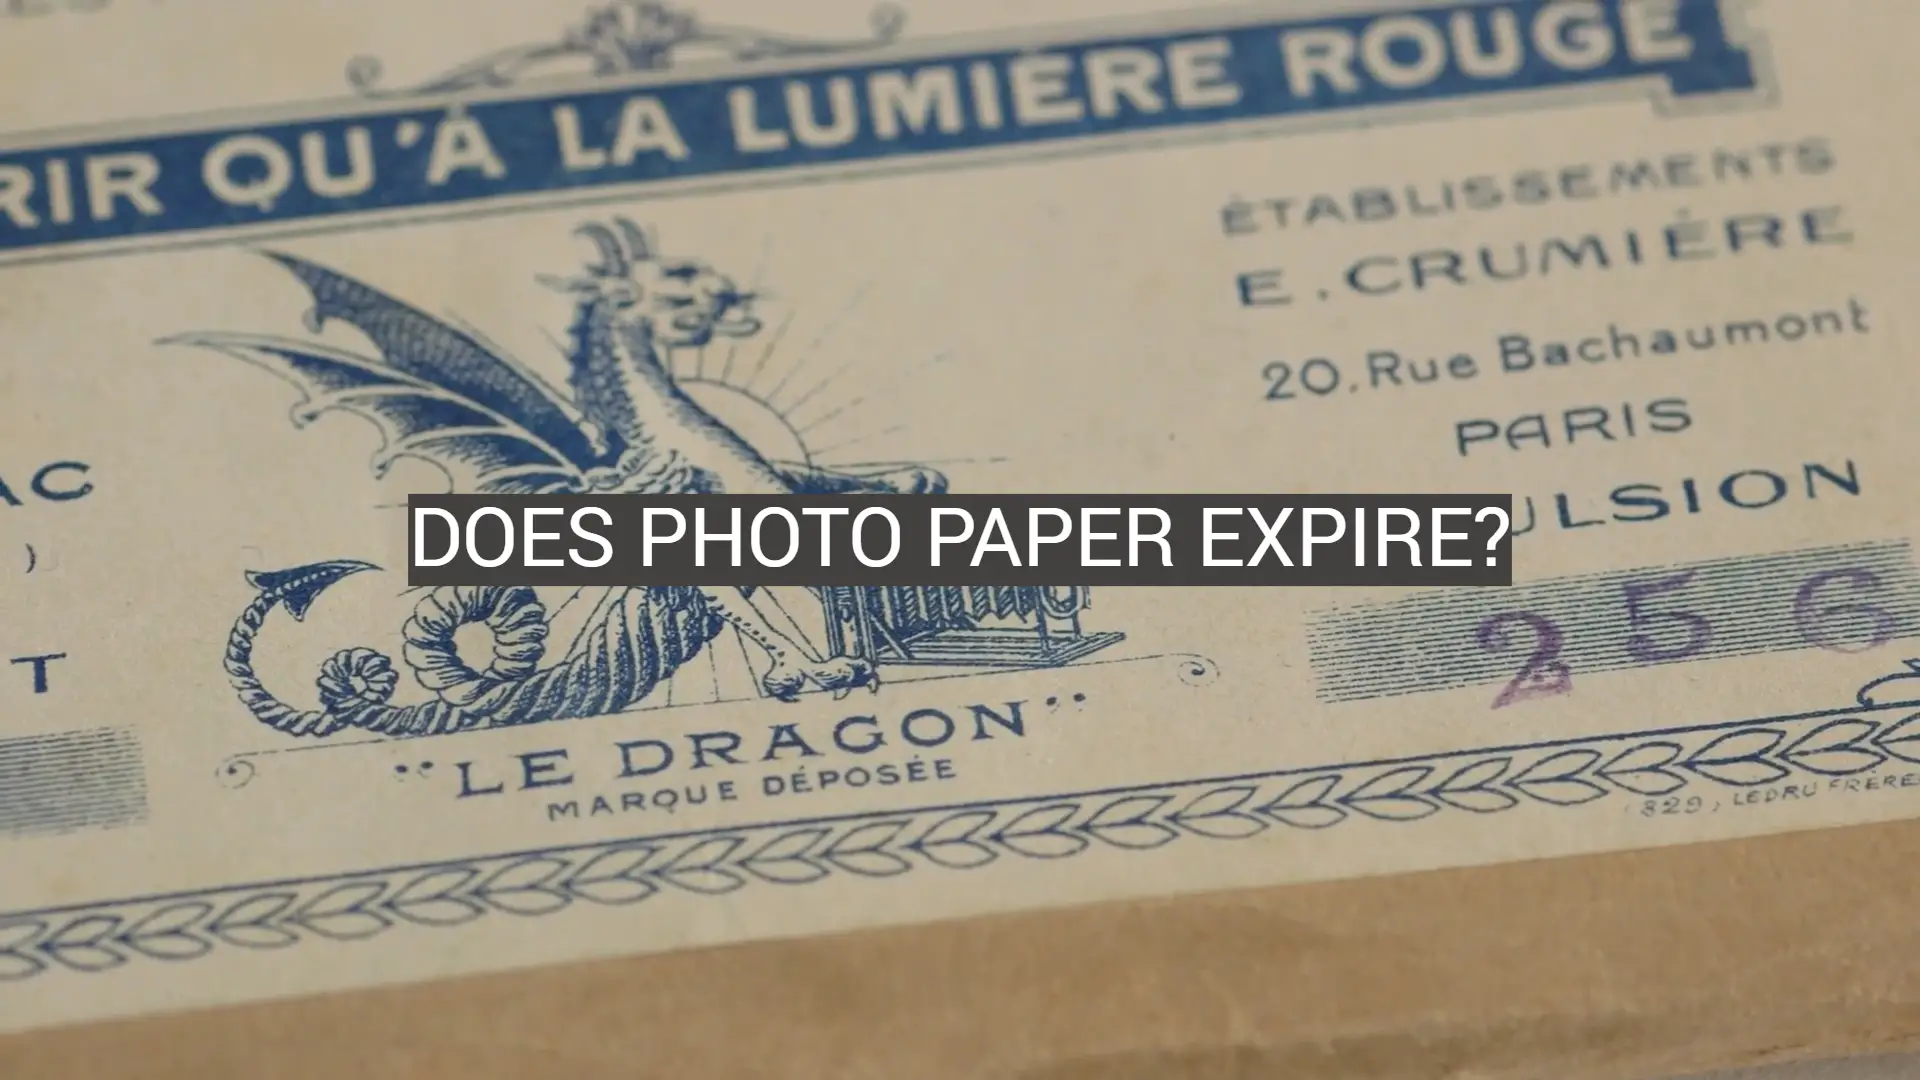 Does Photo Paper Expire?